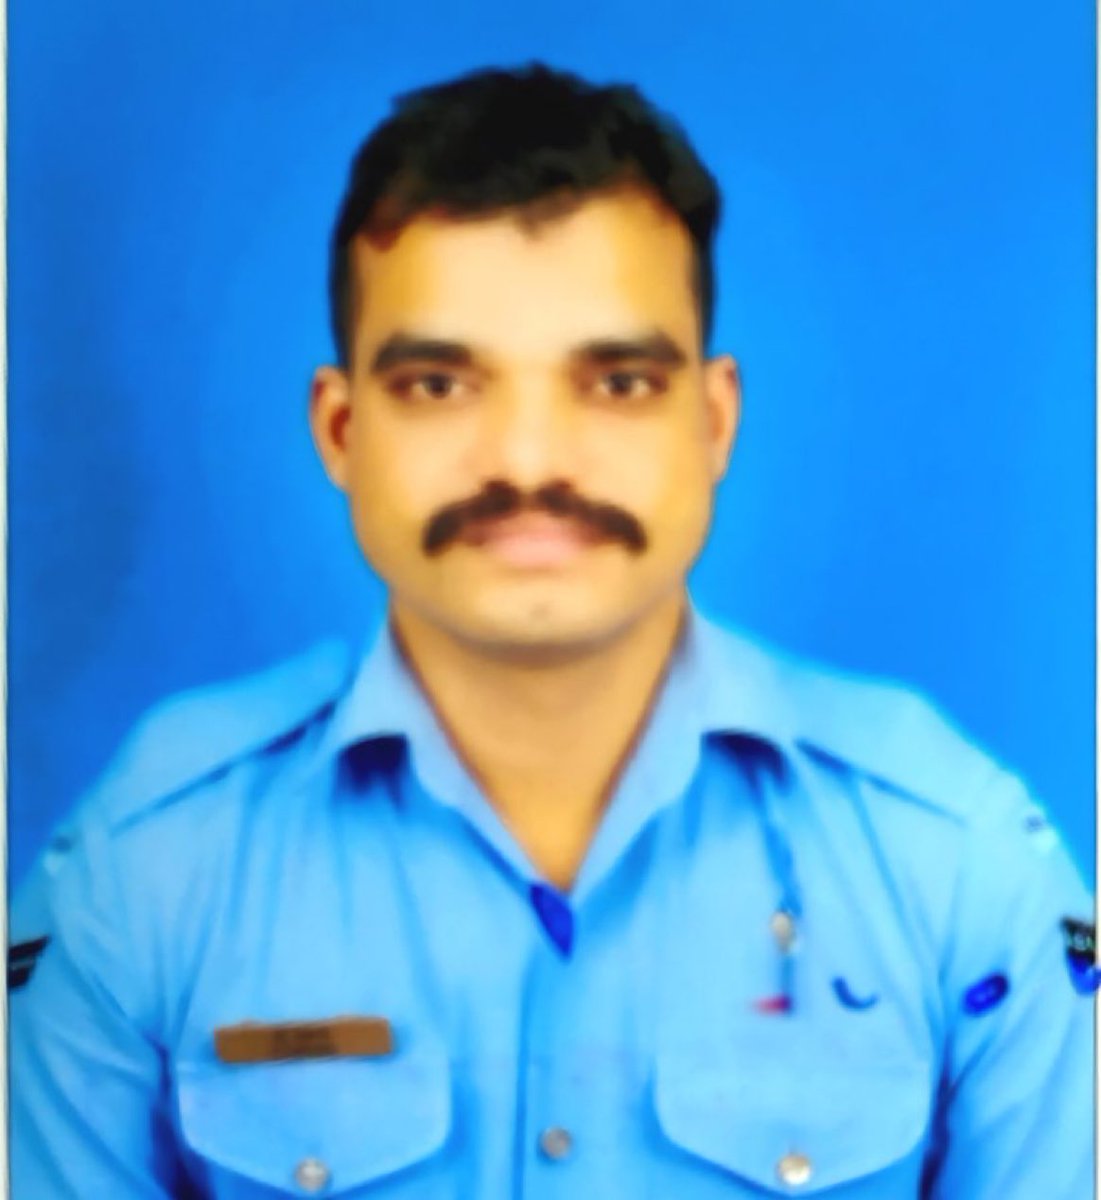 Saddened to learn about the martyrdom of Corporal Vicky Pahade, who was killed in a terror attack in the Poonch region of J&K. I pray to Waheguru to grant eternal peace to the Shaheed. I also pray for the quick recovery of 4 other IAF soldiers who were injured in this attack.